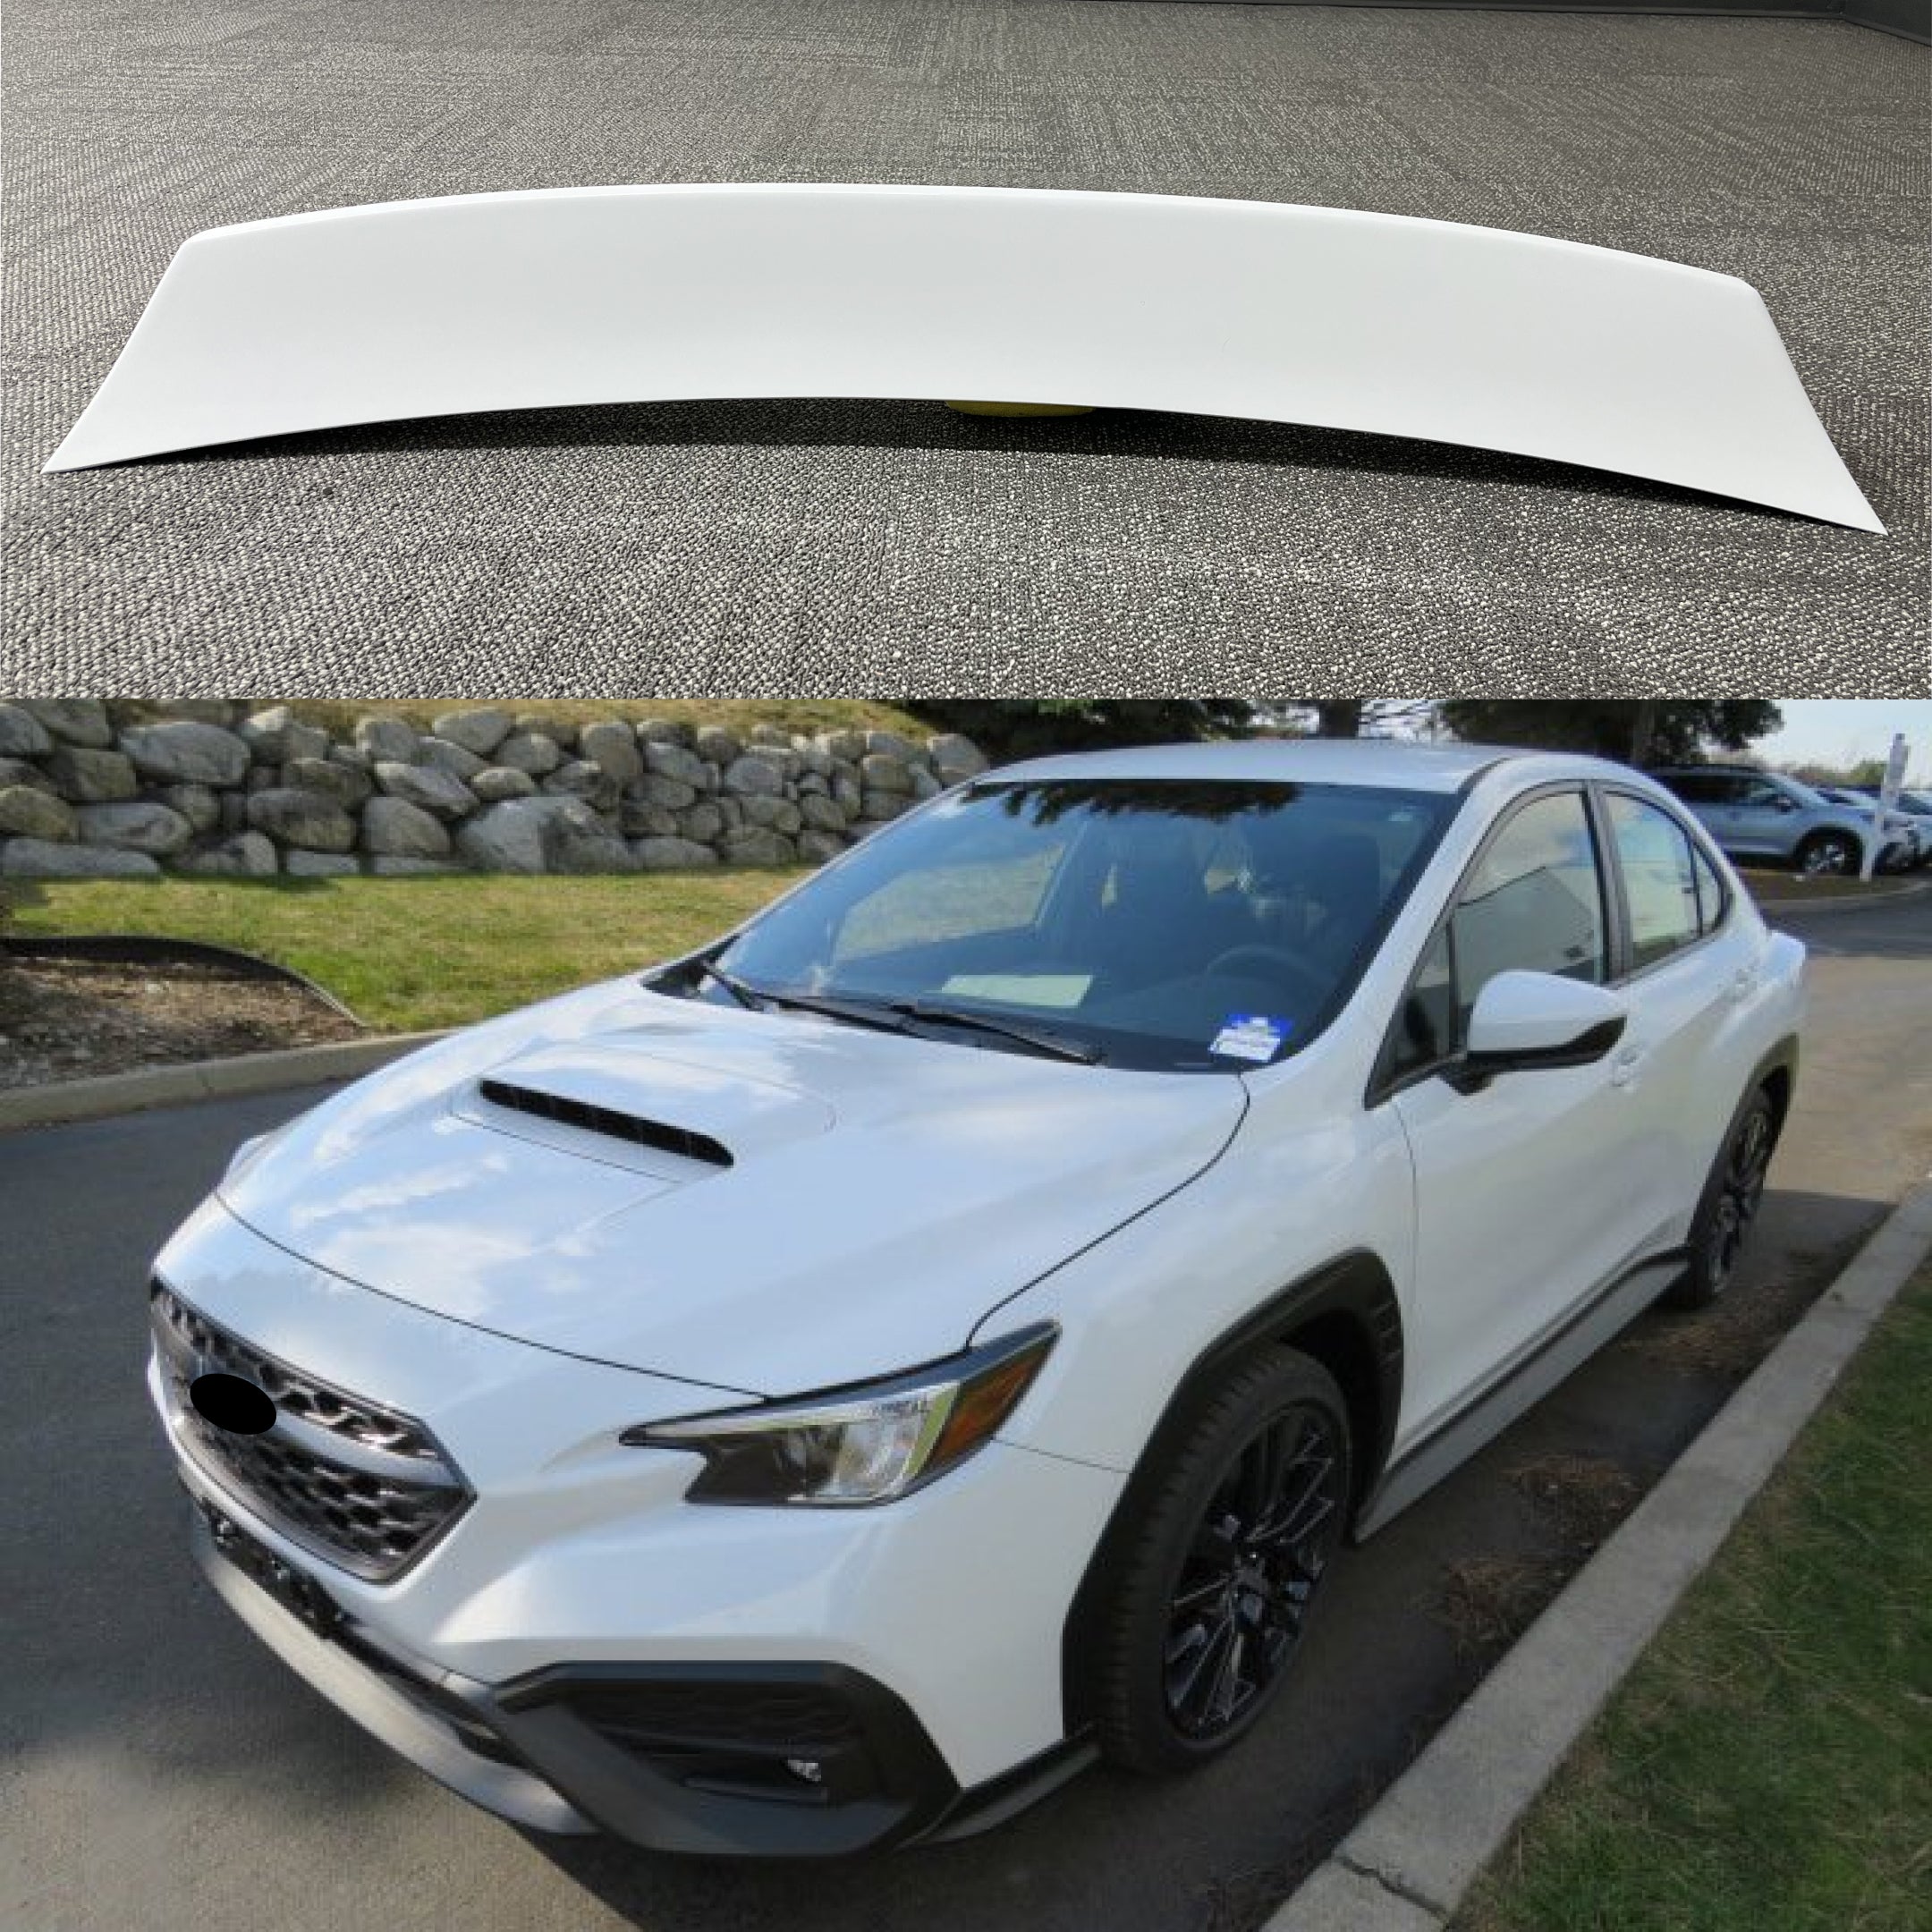 Ceramic White Rear Duckbill Spoiler Wing on WRX STI 2022-2024, perfectly matched to enhance aerodynamics and the sporty profile.